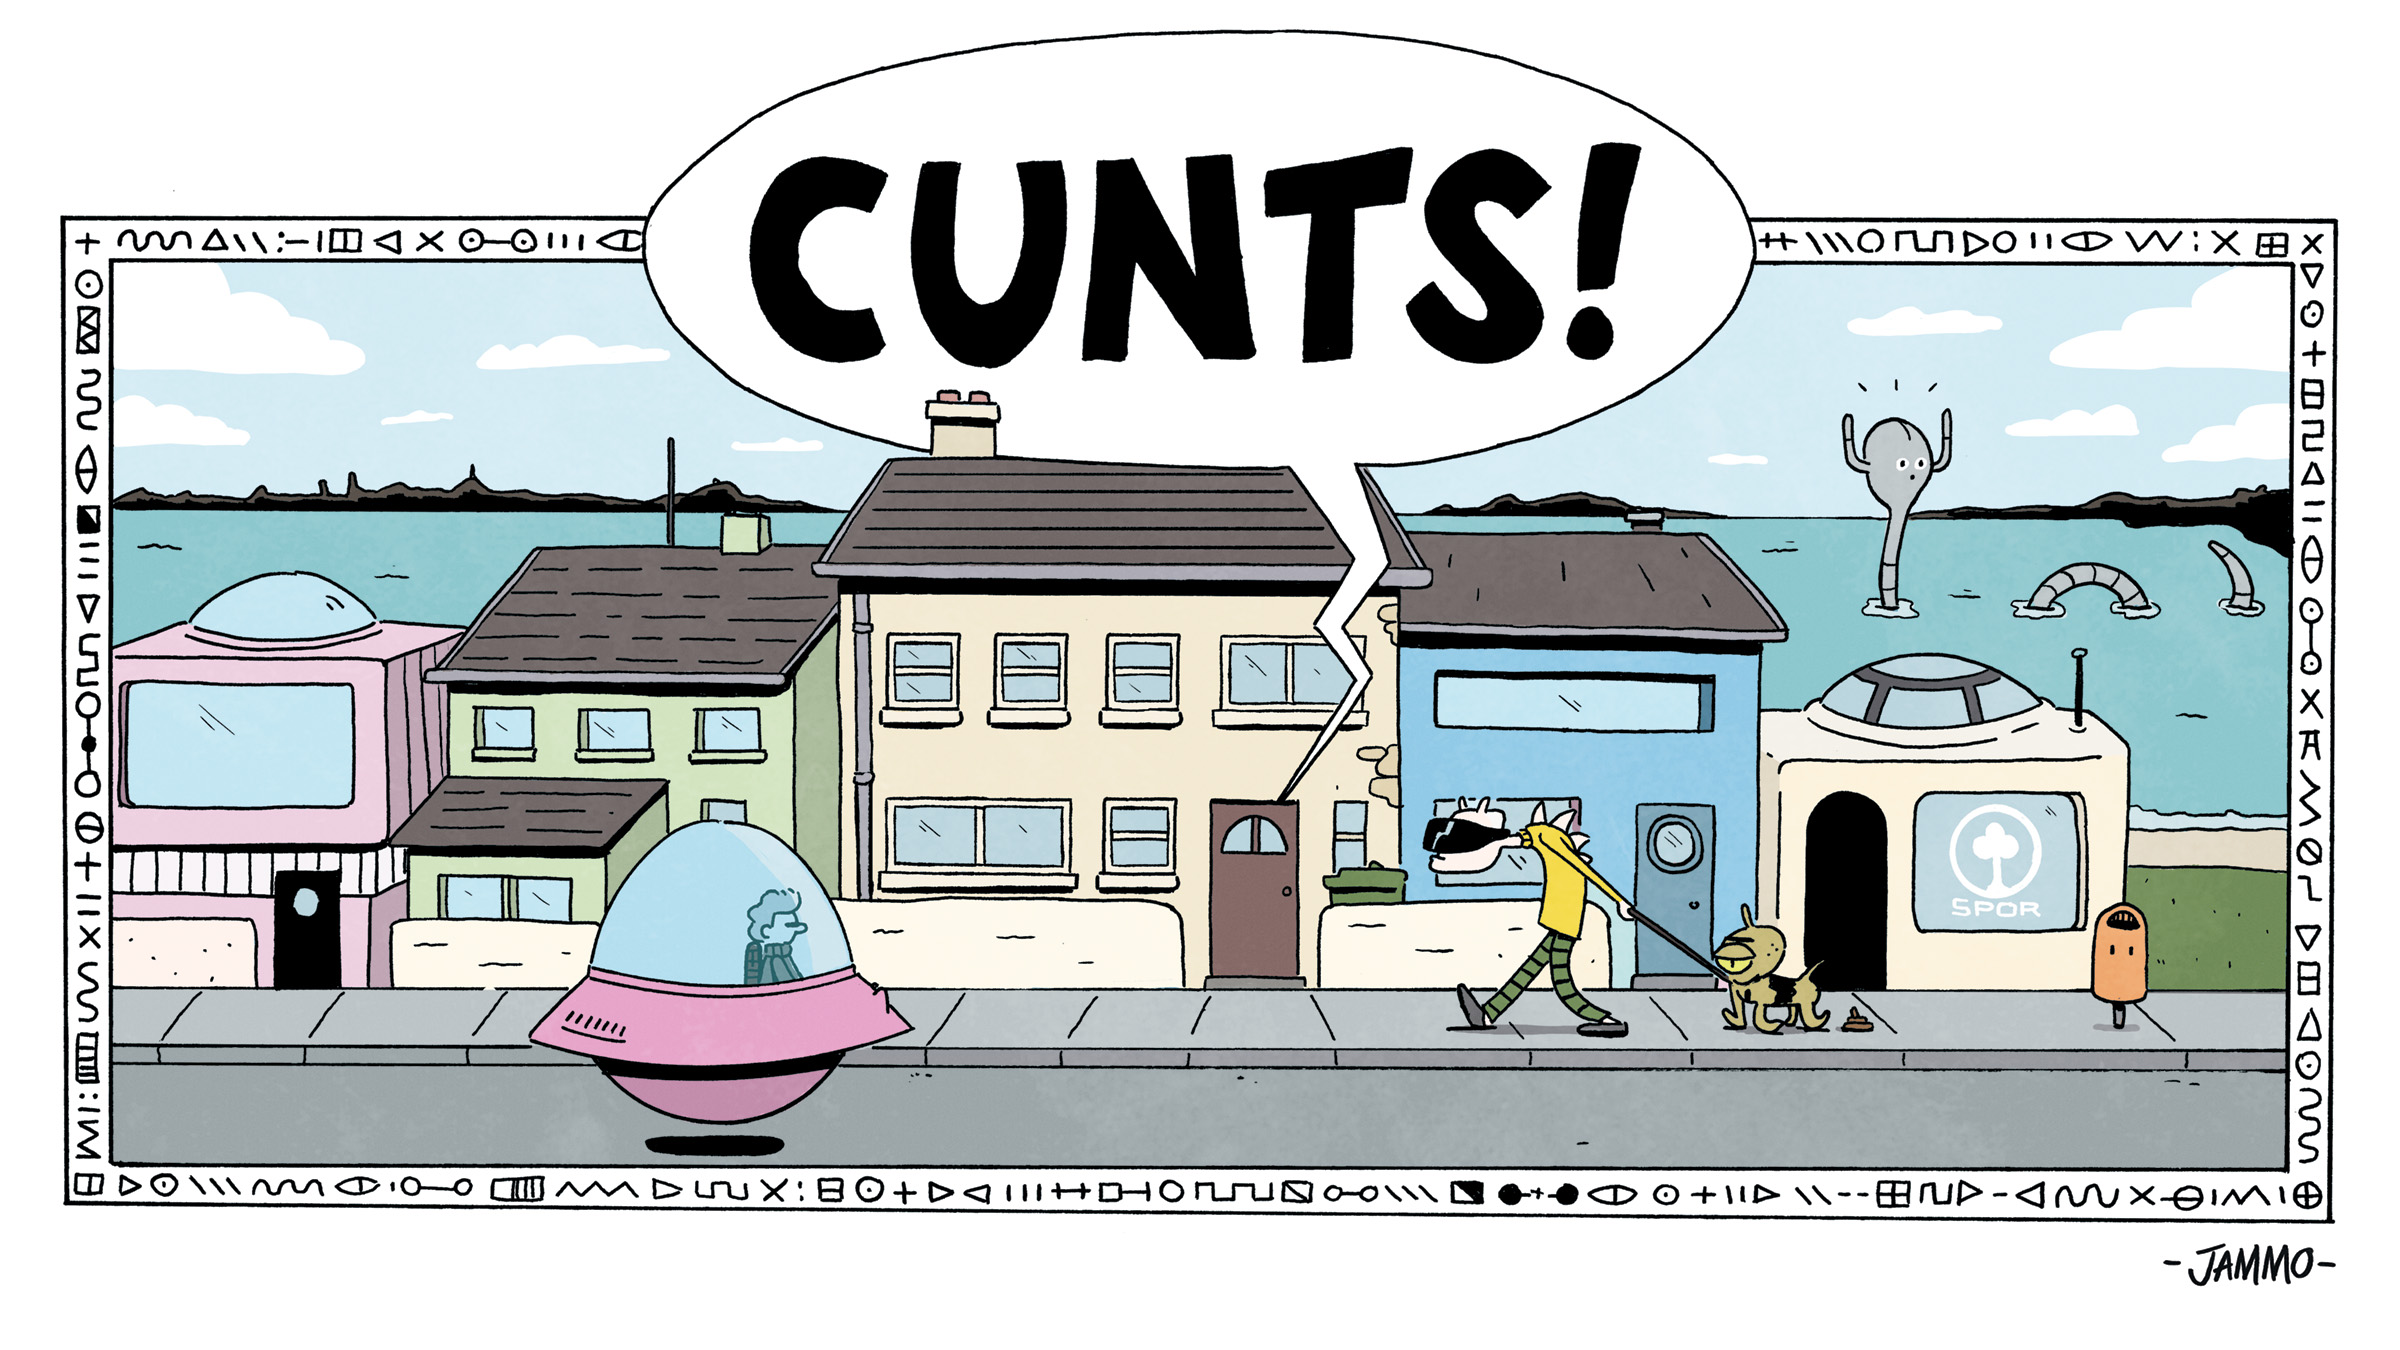 Full page comic panel of a seaside town in the future. An alien creature is walking his pet. A large speech bubble, appearing from a house reads "CUNTS!" 